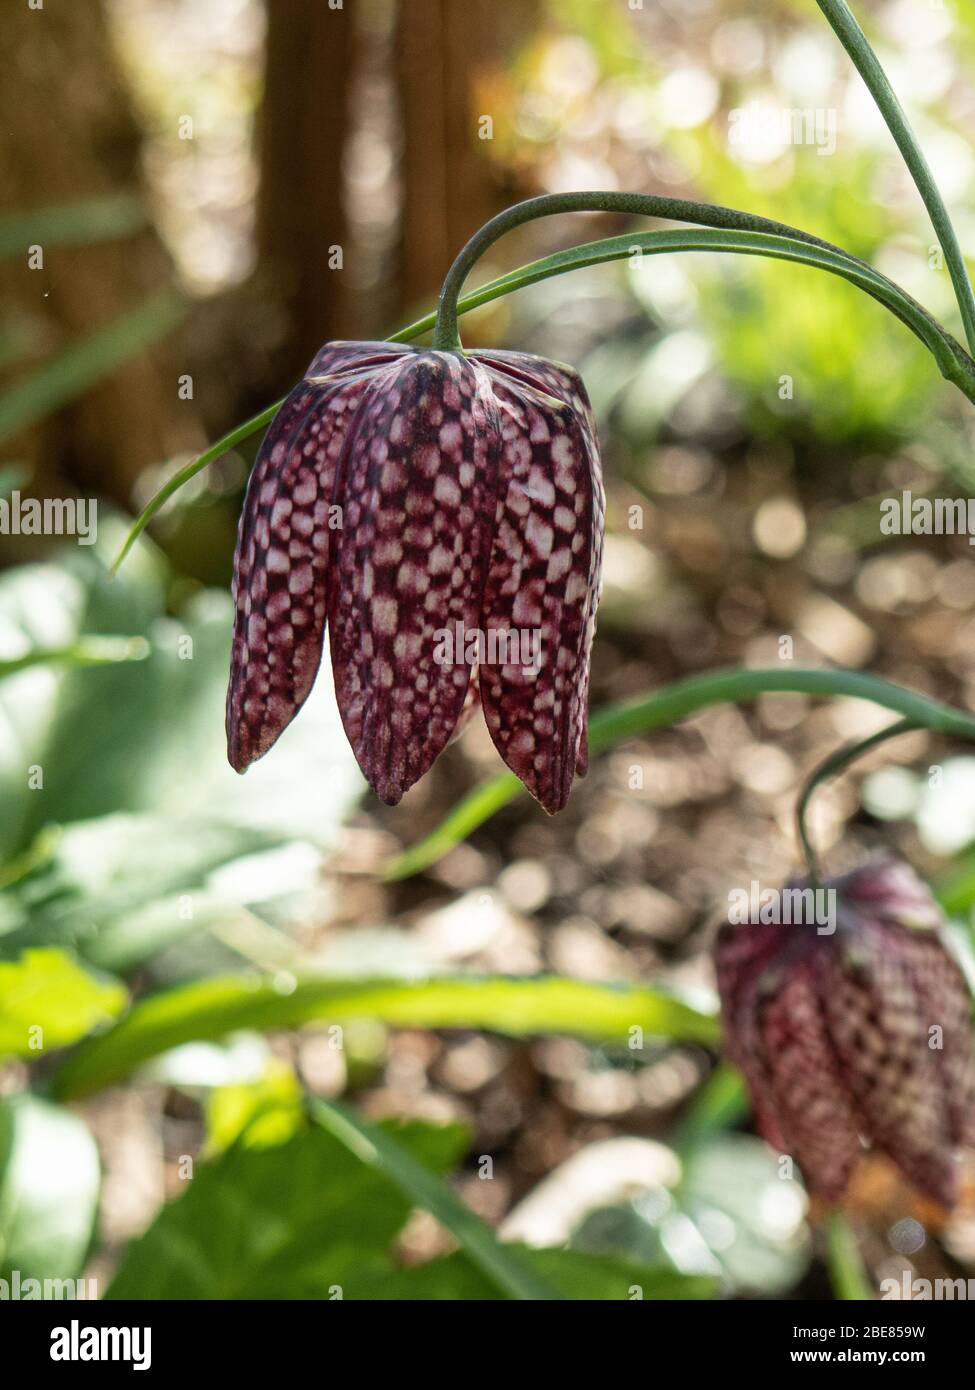 A close up of a single flower of the snakes head fritillary Fritillaria meleagris Stock Photo